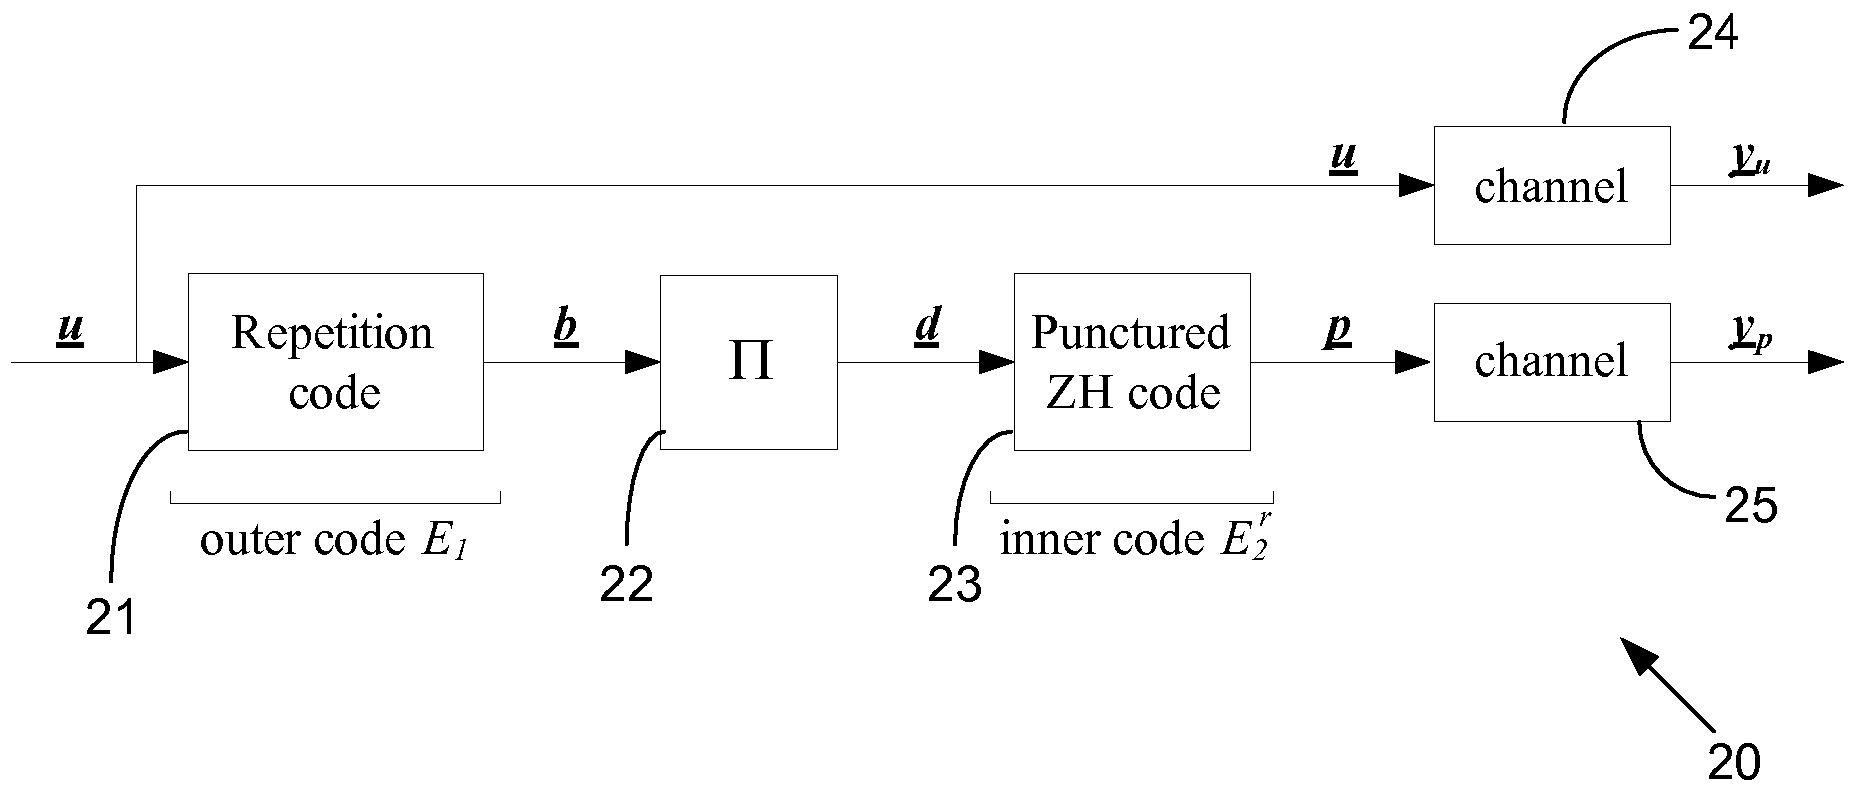 Low-complexity high-performance low-rate communications codes